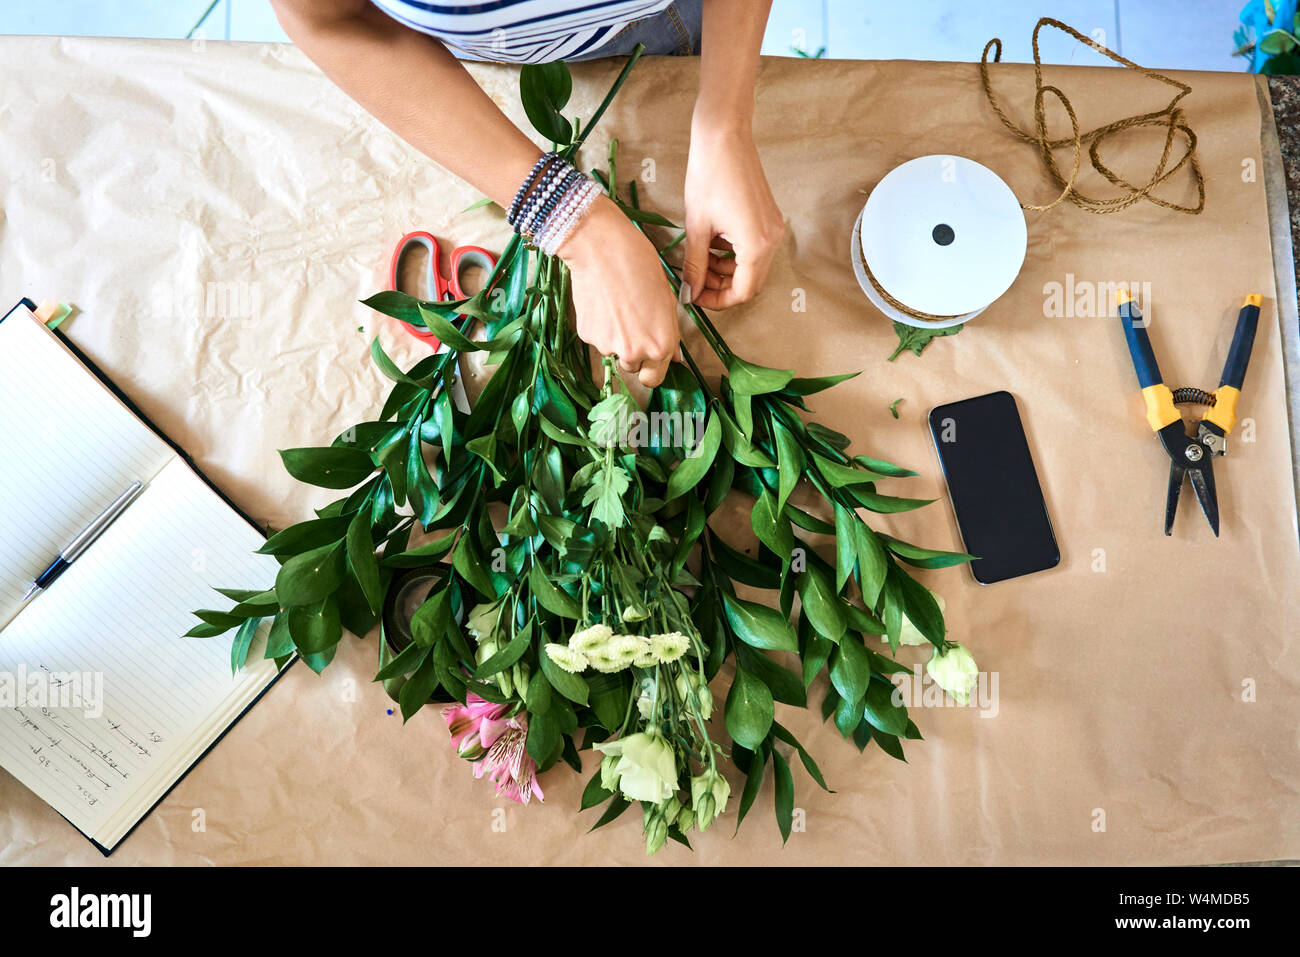 Florist selecting flowers for bouquet and arranging them together at the counter top Stock Photo